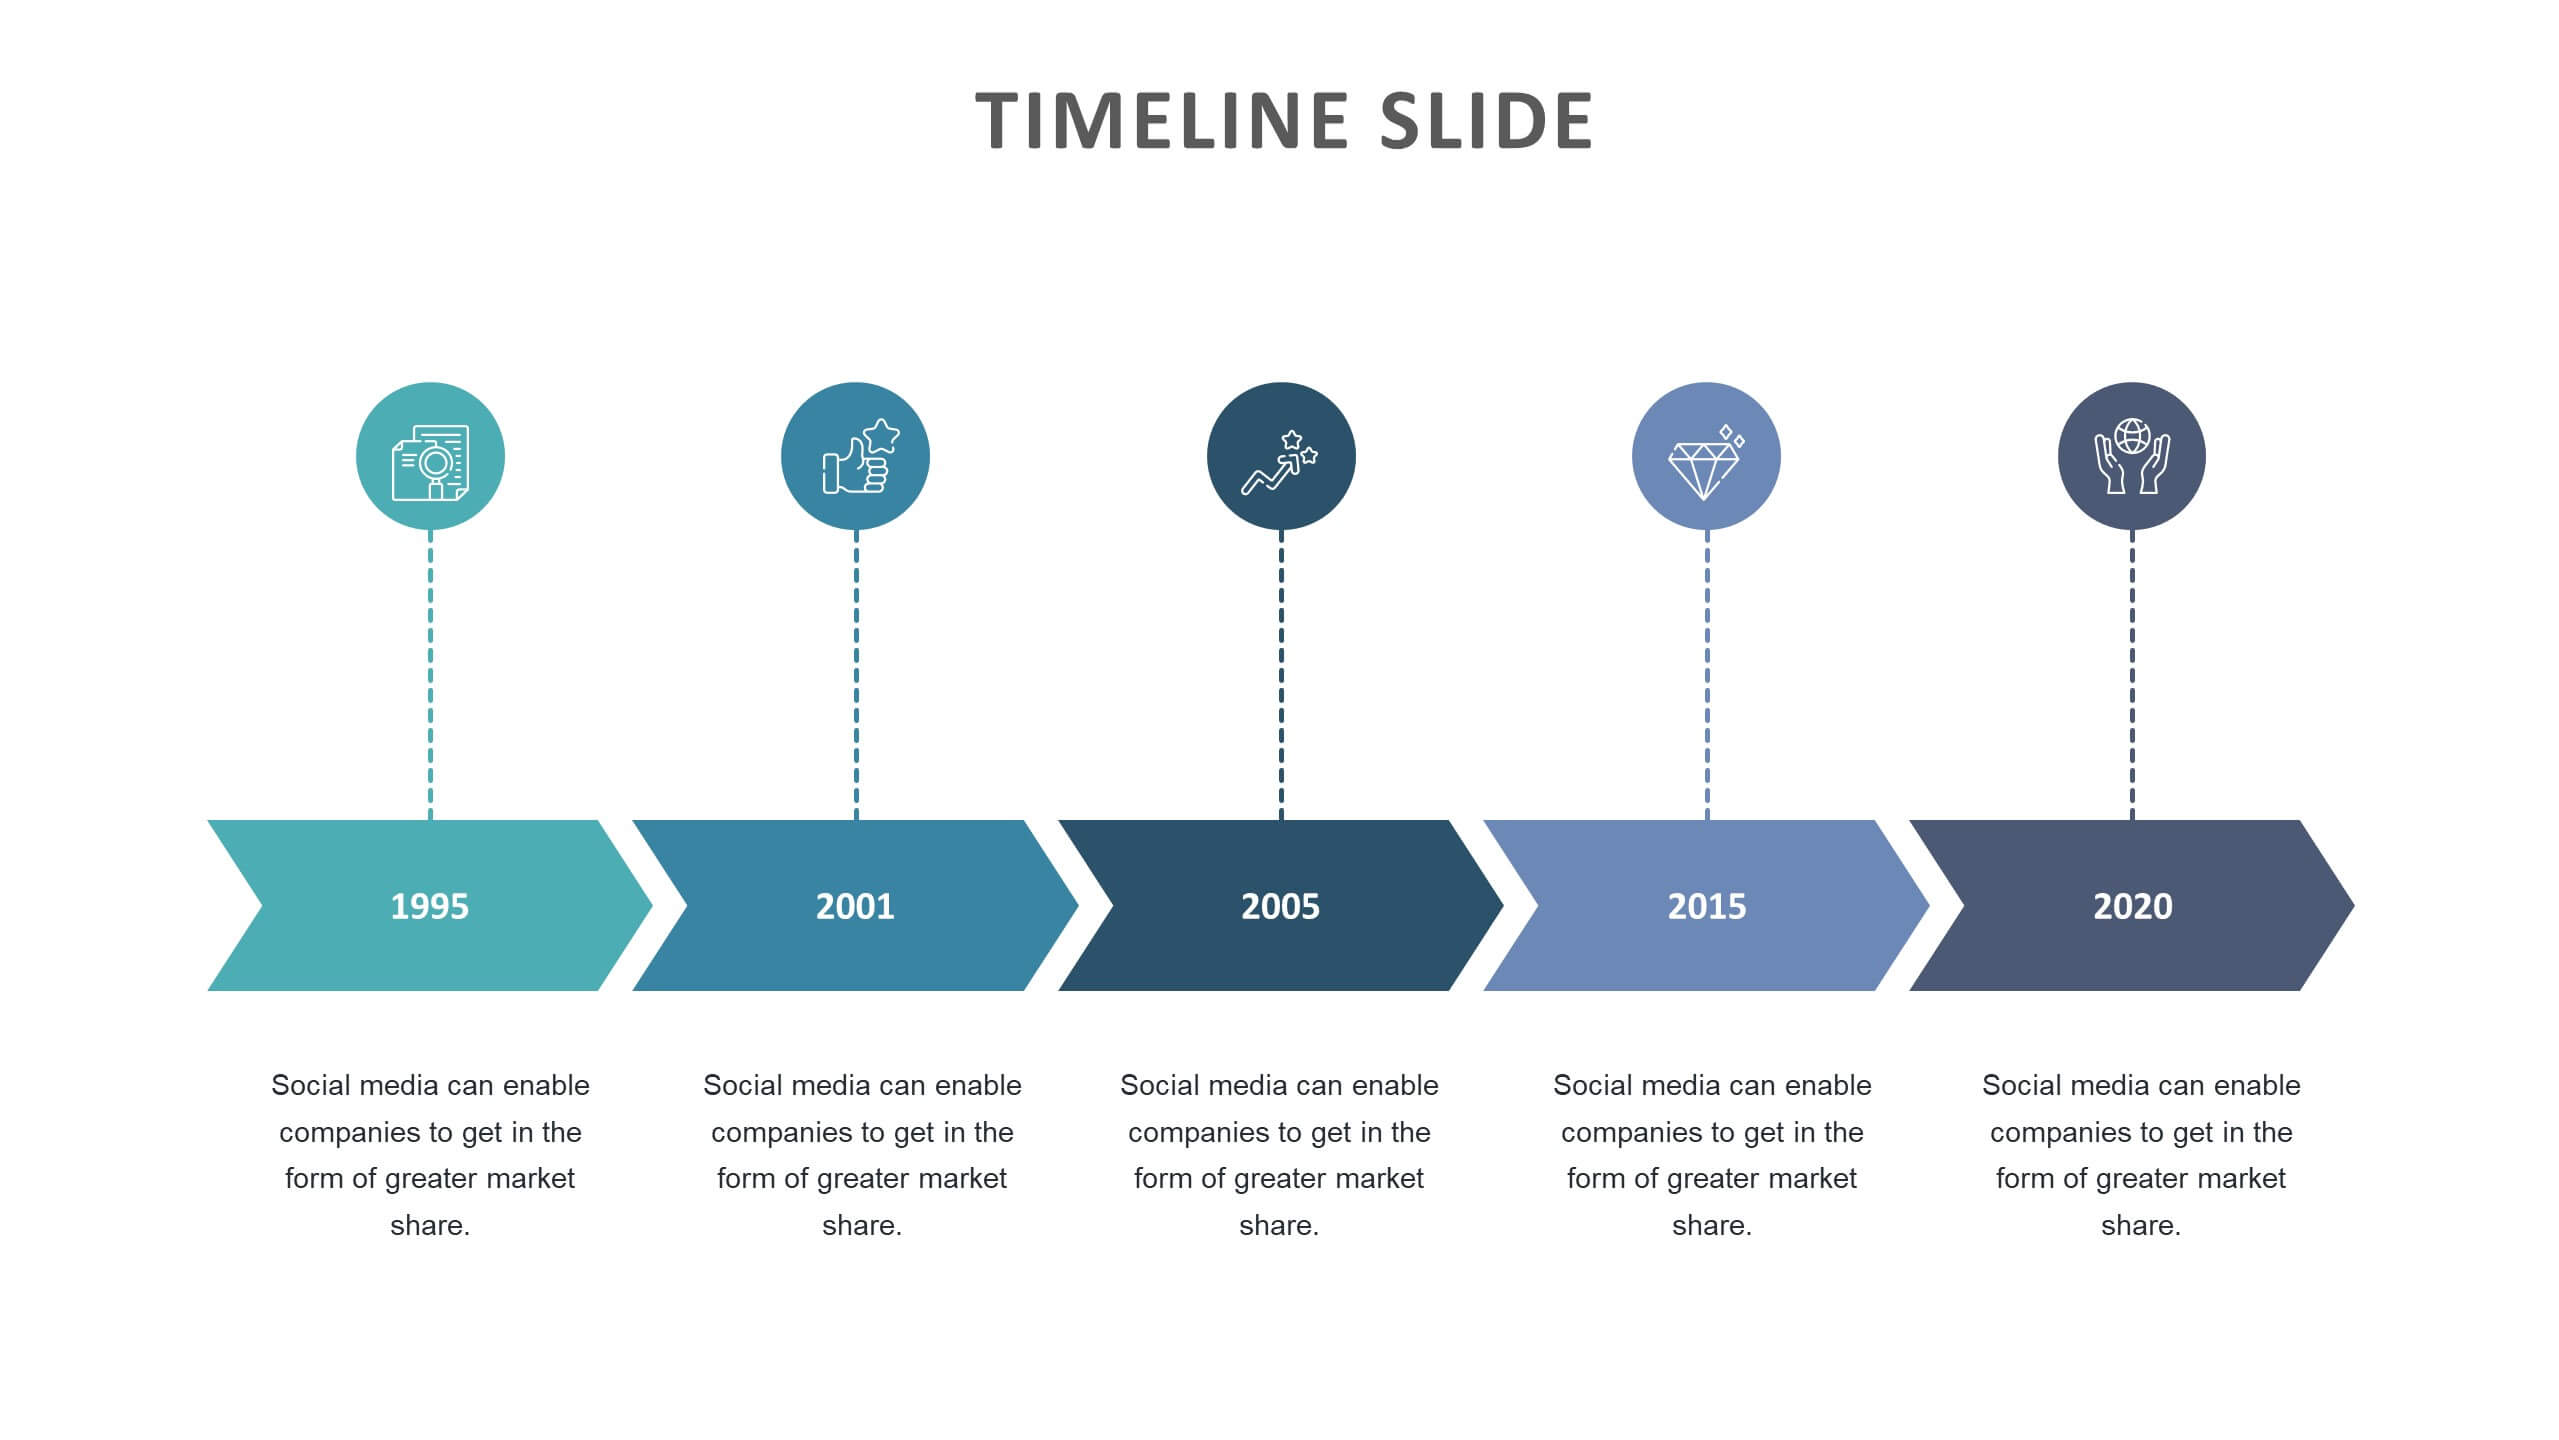 How To Make A Good Timeline In Powerpoint - Printable Templates